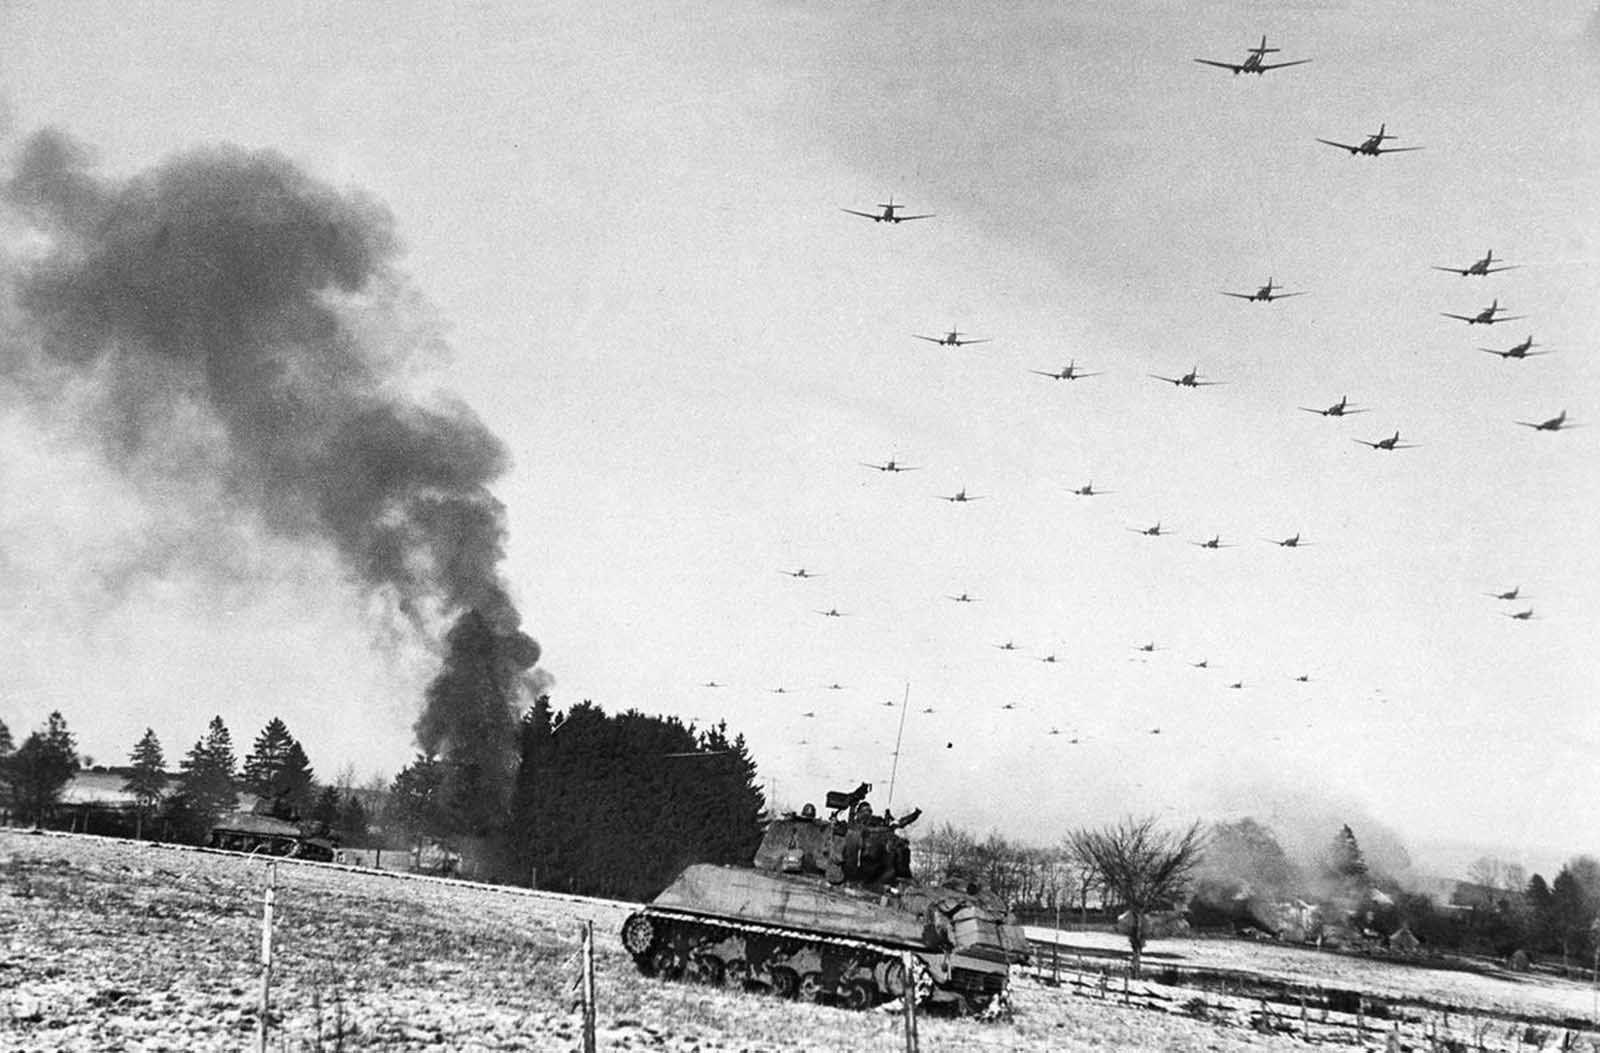 Low flying C-47 transport planes roar overhead as they carry supplies to the besieged American Forces battling the Germans at Bastogne, during the enemy breakthrough on January 6, 1945 in Belgium. In the distance, smoke rises from wrecked German equipment, while in the foreground, American tanks move up to support the infantry in the fighting.